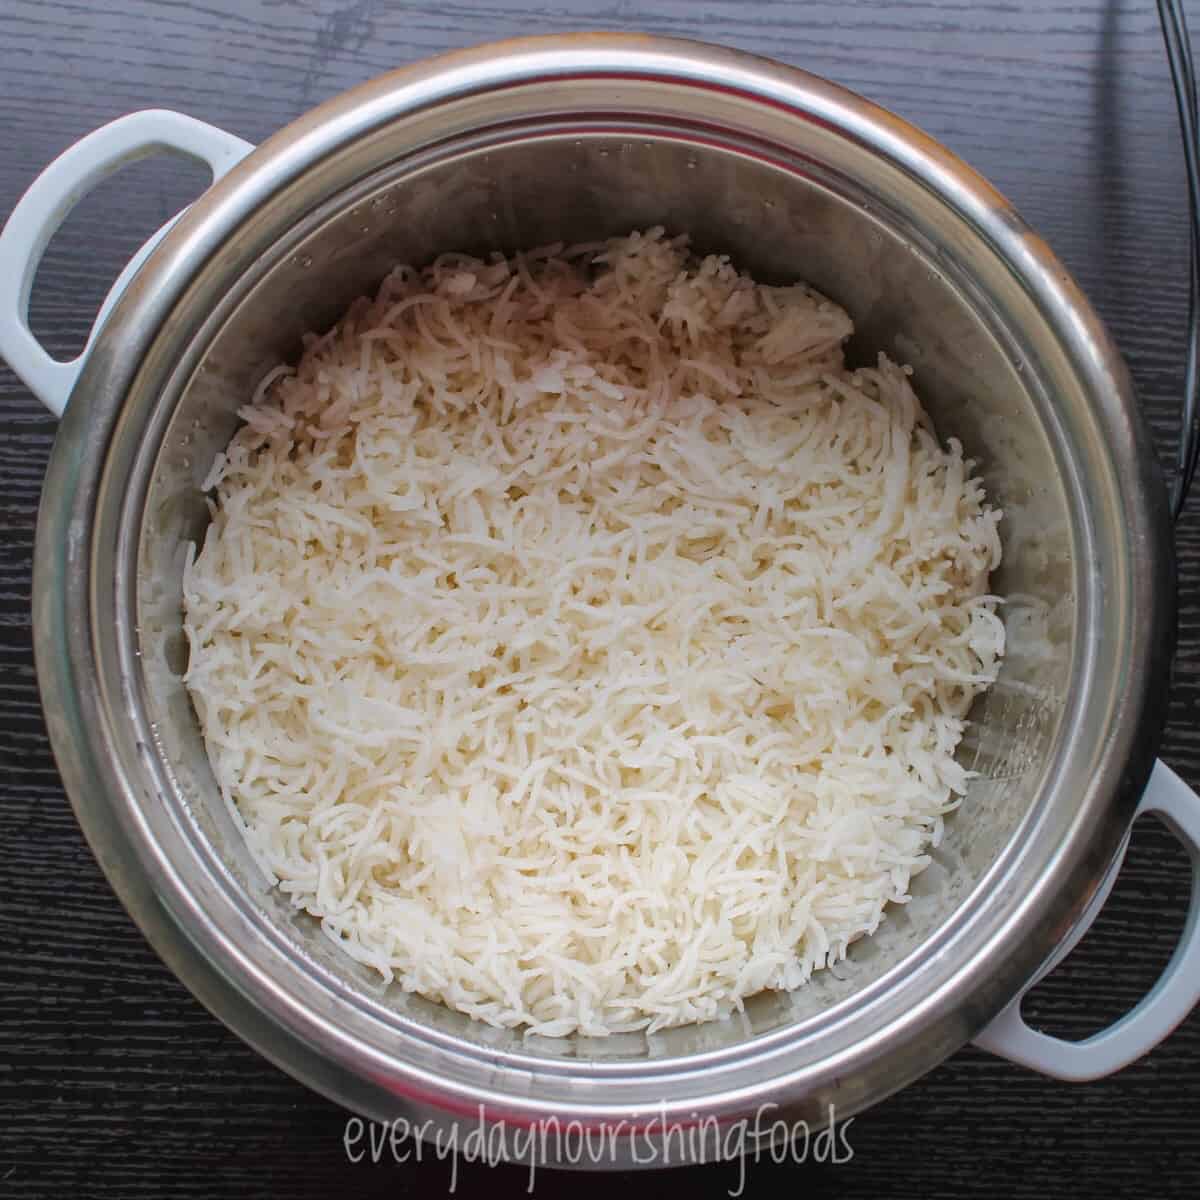 basmati rice in a rice cooker